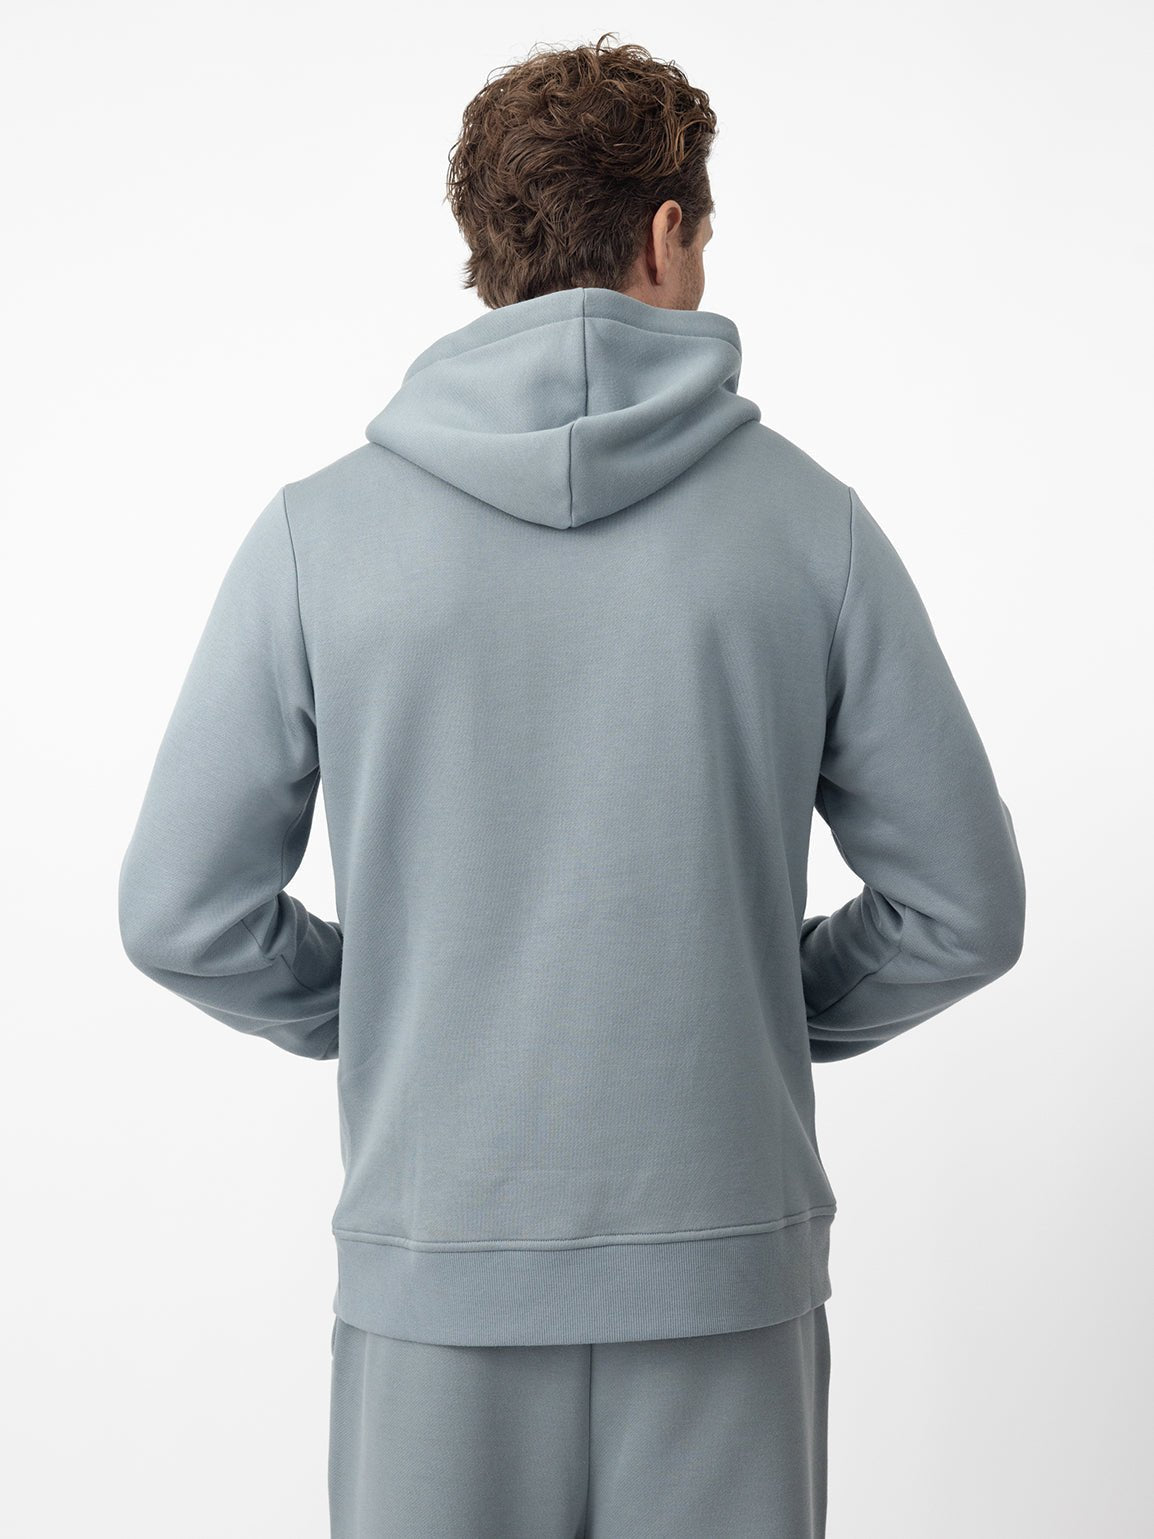 Back of man wearing smokey blue cityscape hoodie with white background 